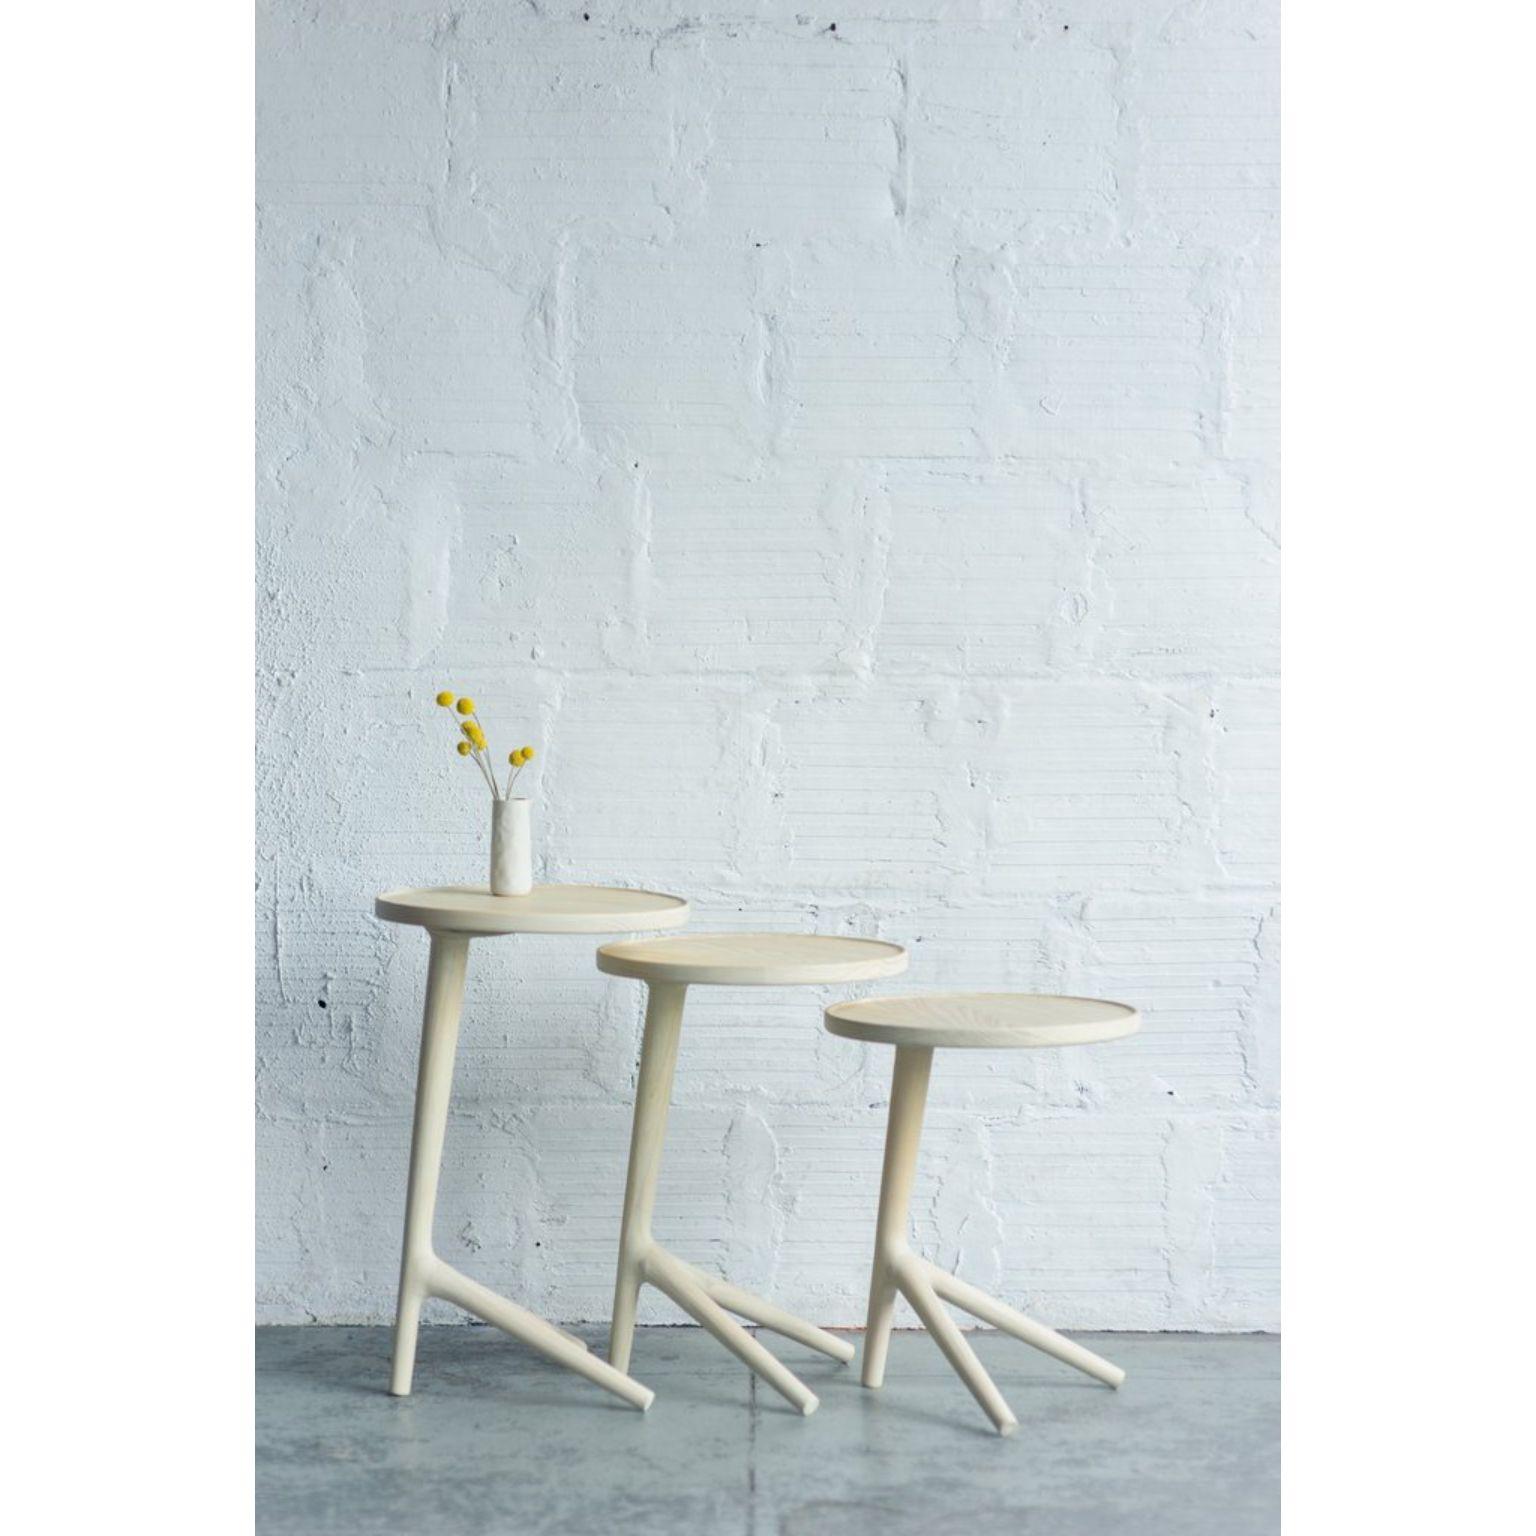 Modern Set of 3 White Ash Tripod Table by Fernweh Woodworking